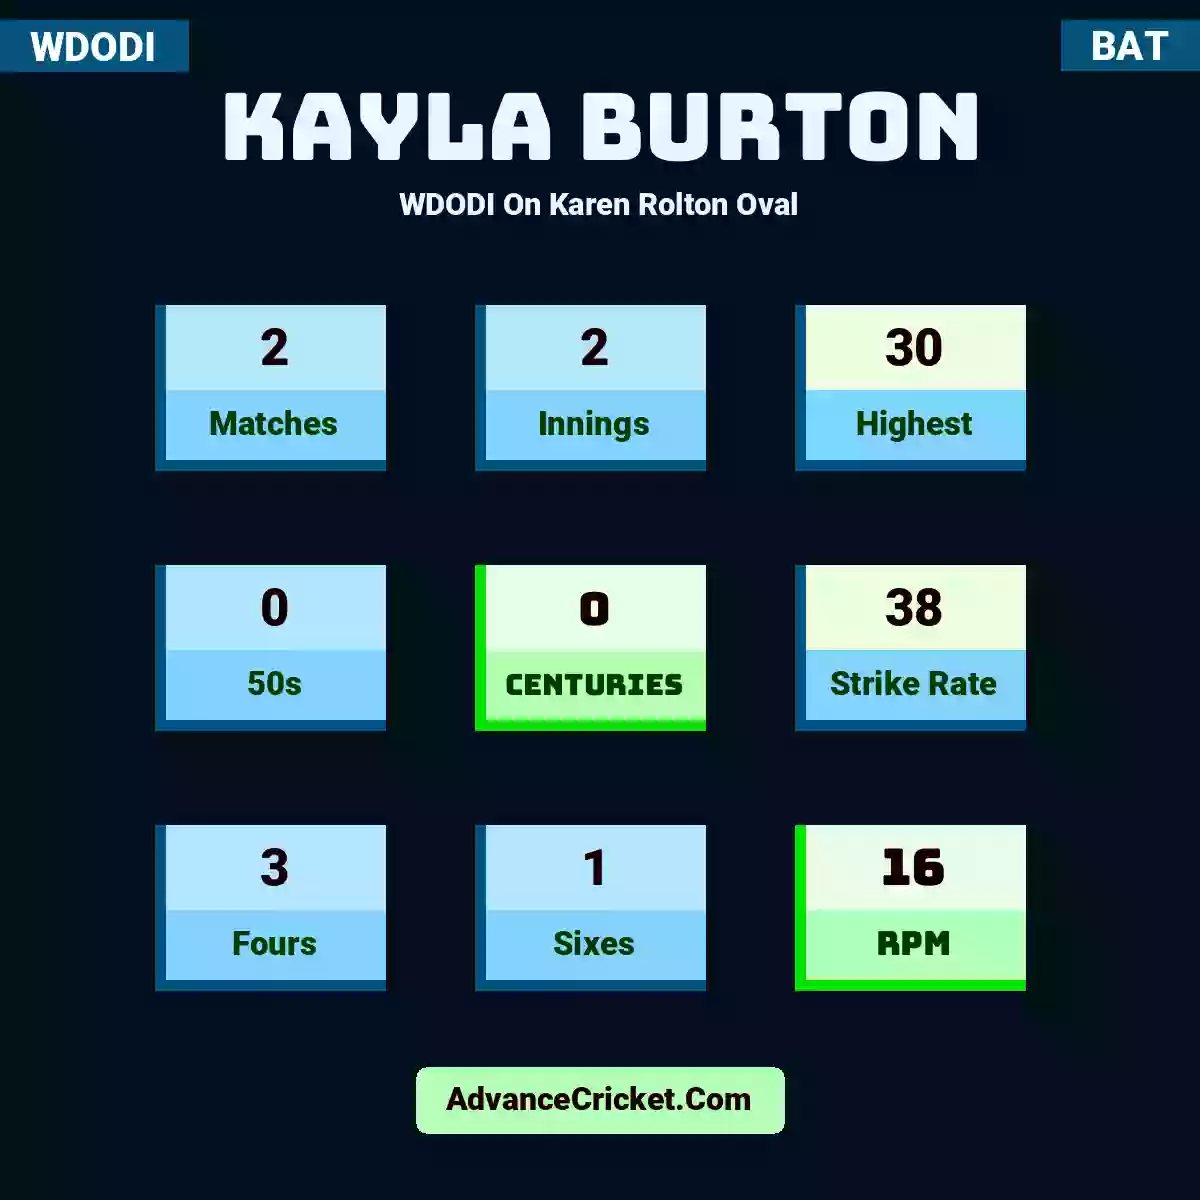 Kayla Burton WDODI  On Karen Rolton Oval, Kayla Burton played 2 matches, scored 30 runs as highest, 0 half-centuries, and 0 centuries, with a strike rate of 38. K.Burton hit 3 fours and 1 sixes, with an RPM of 16.